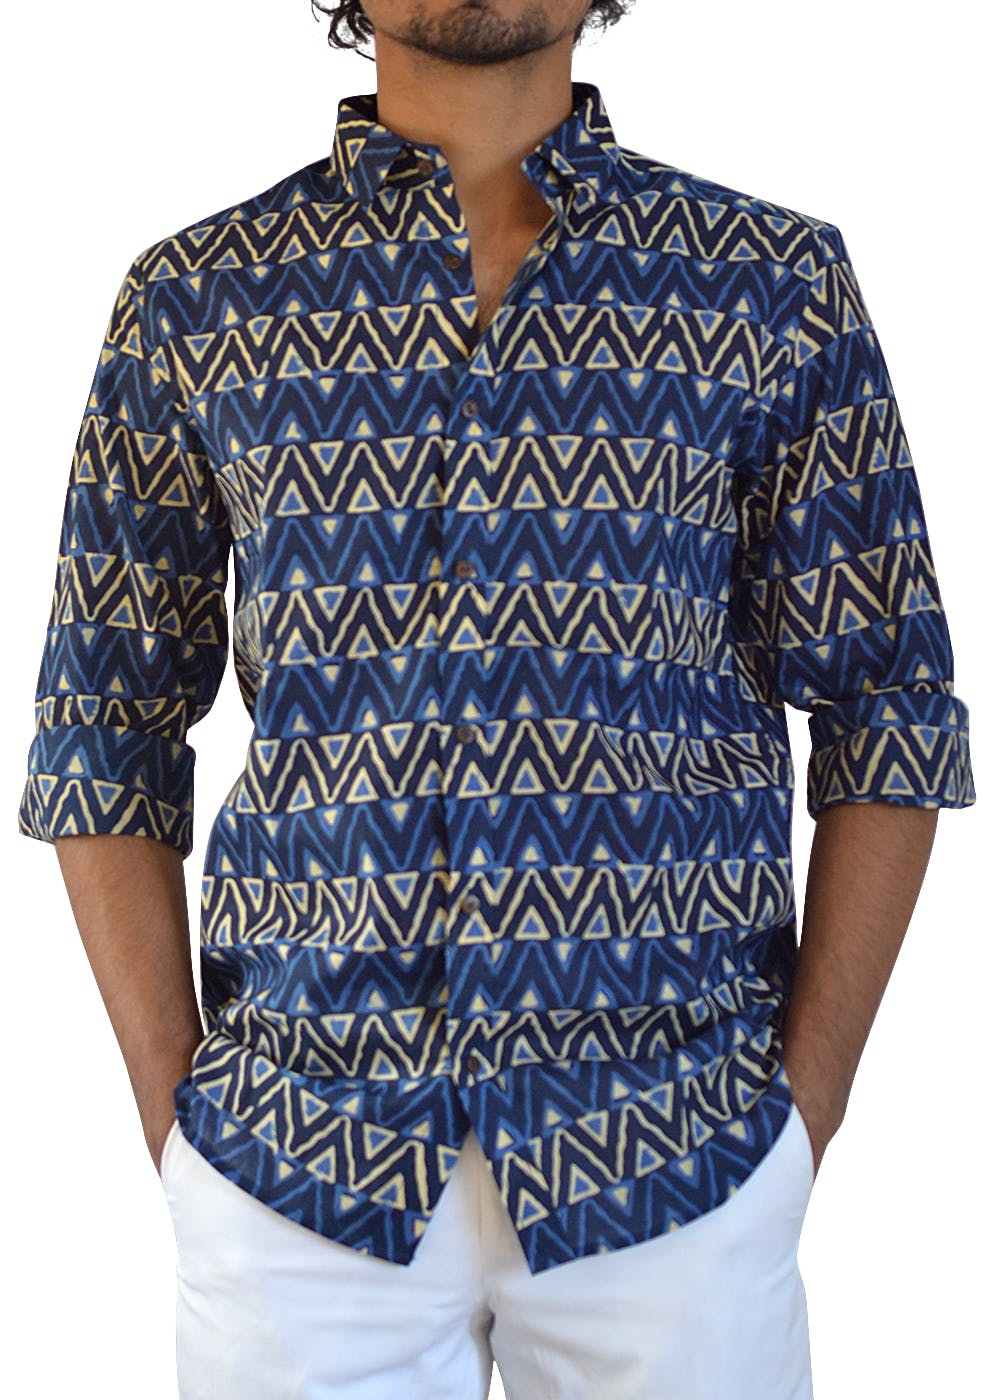 Geometric Triangles Printed Handstitched Shirt